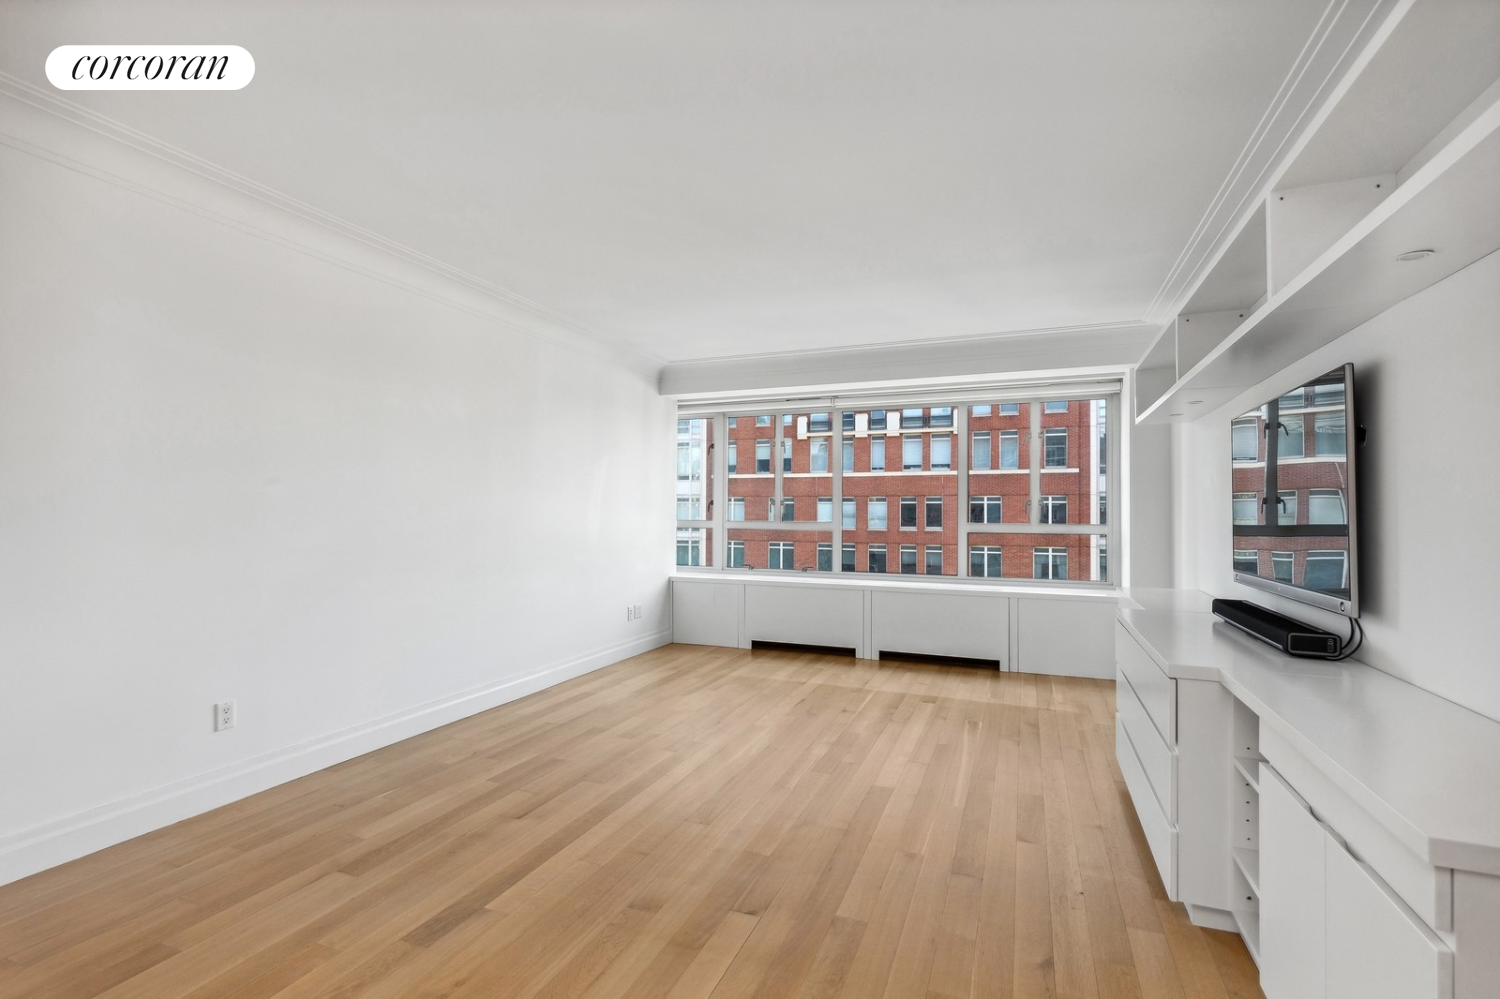 200 East 66th Street A1905, Lenox Hill, Upper East Side, NYC - 1 Bedrooms  
1 Bathrooms  
3 Rooms - 